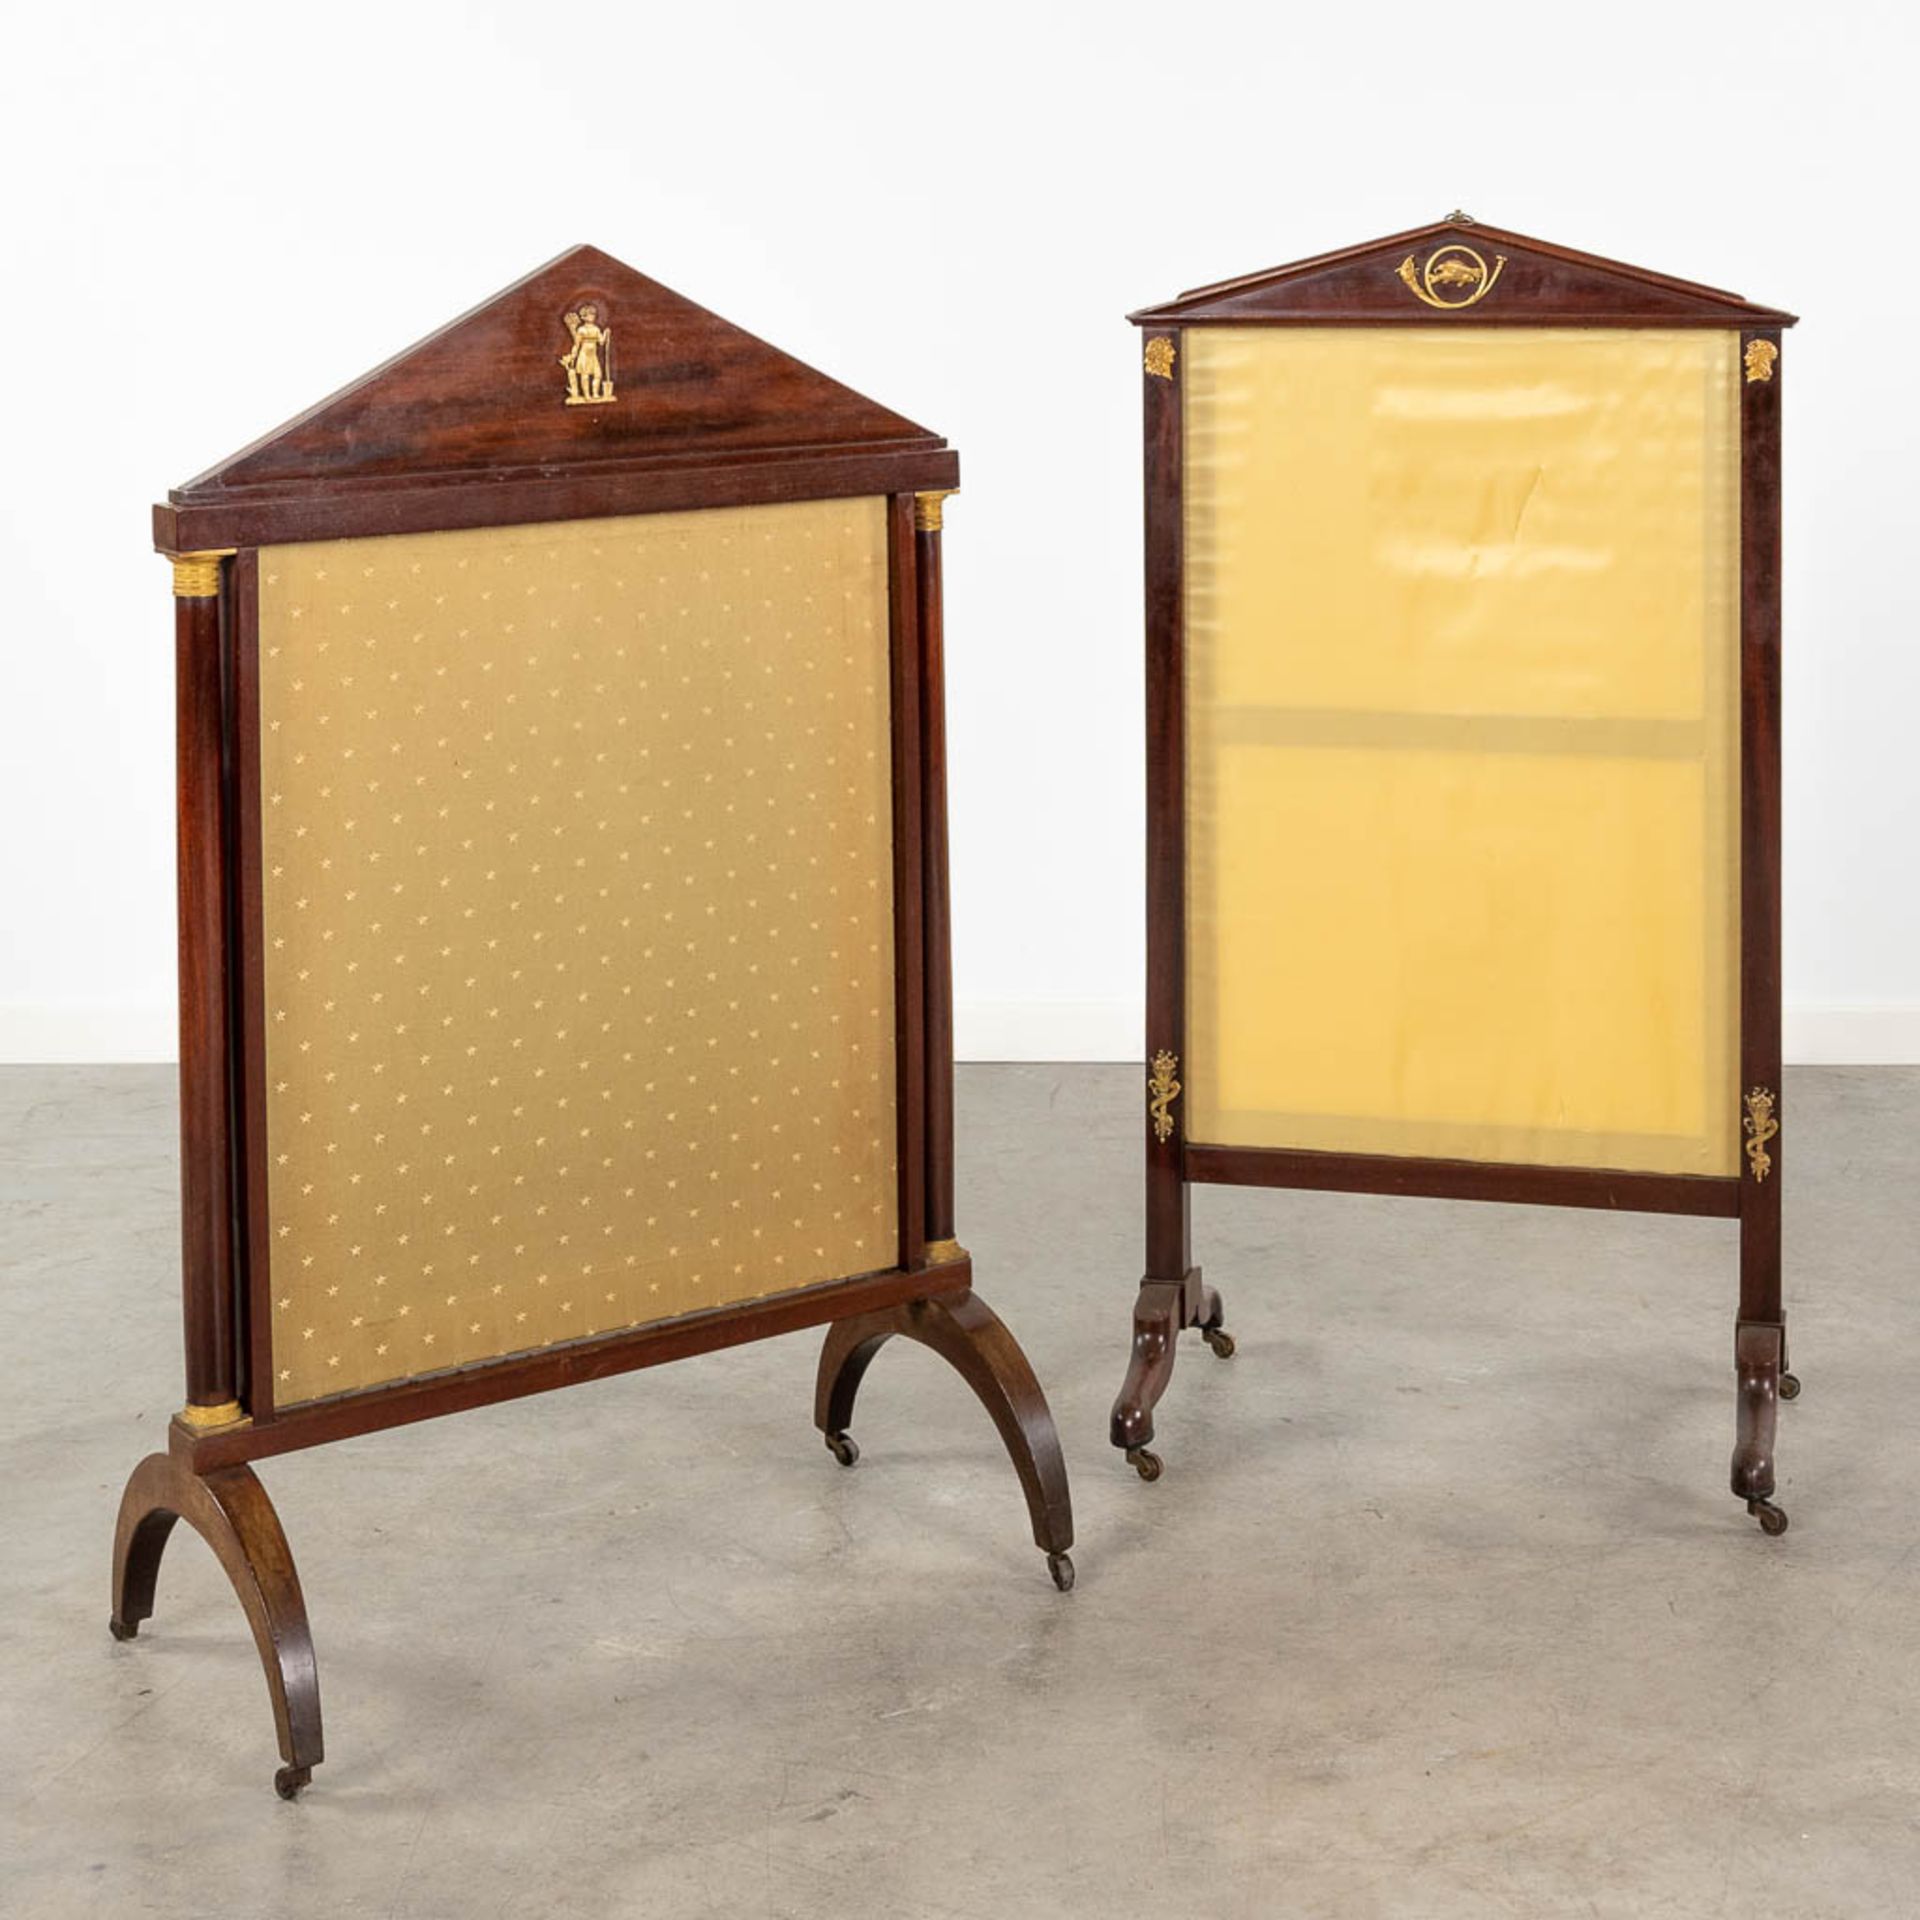 A collection of 2 fireplace screens, made of mahogany in empire style. 19th C. (W:56 x H:101 cm)